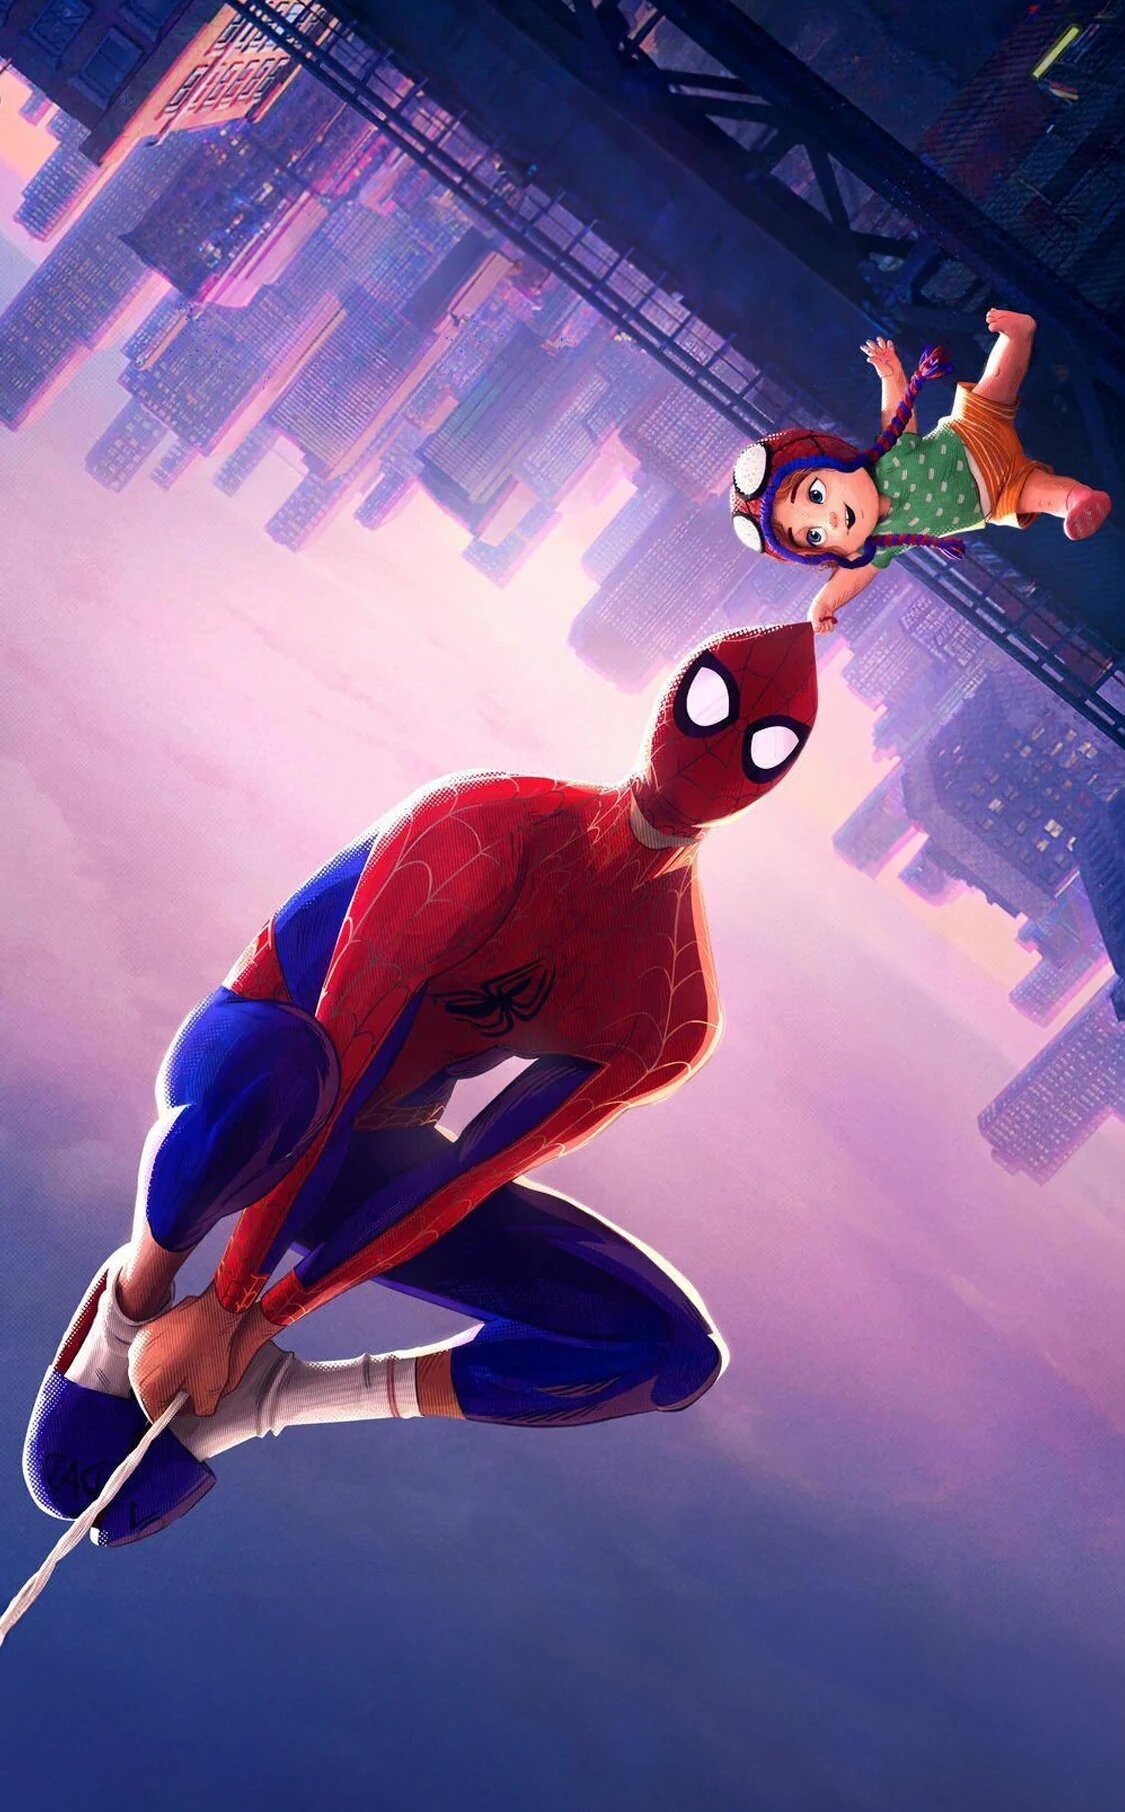 You can join the Spider-Verse 'Spider Society' by texting this